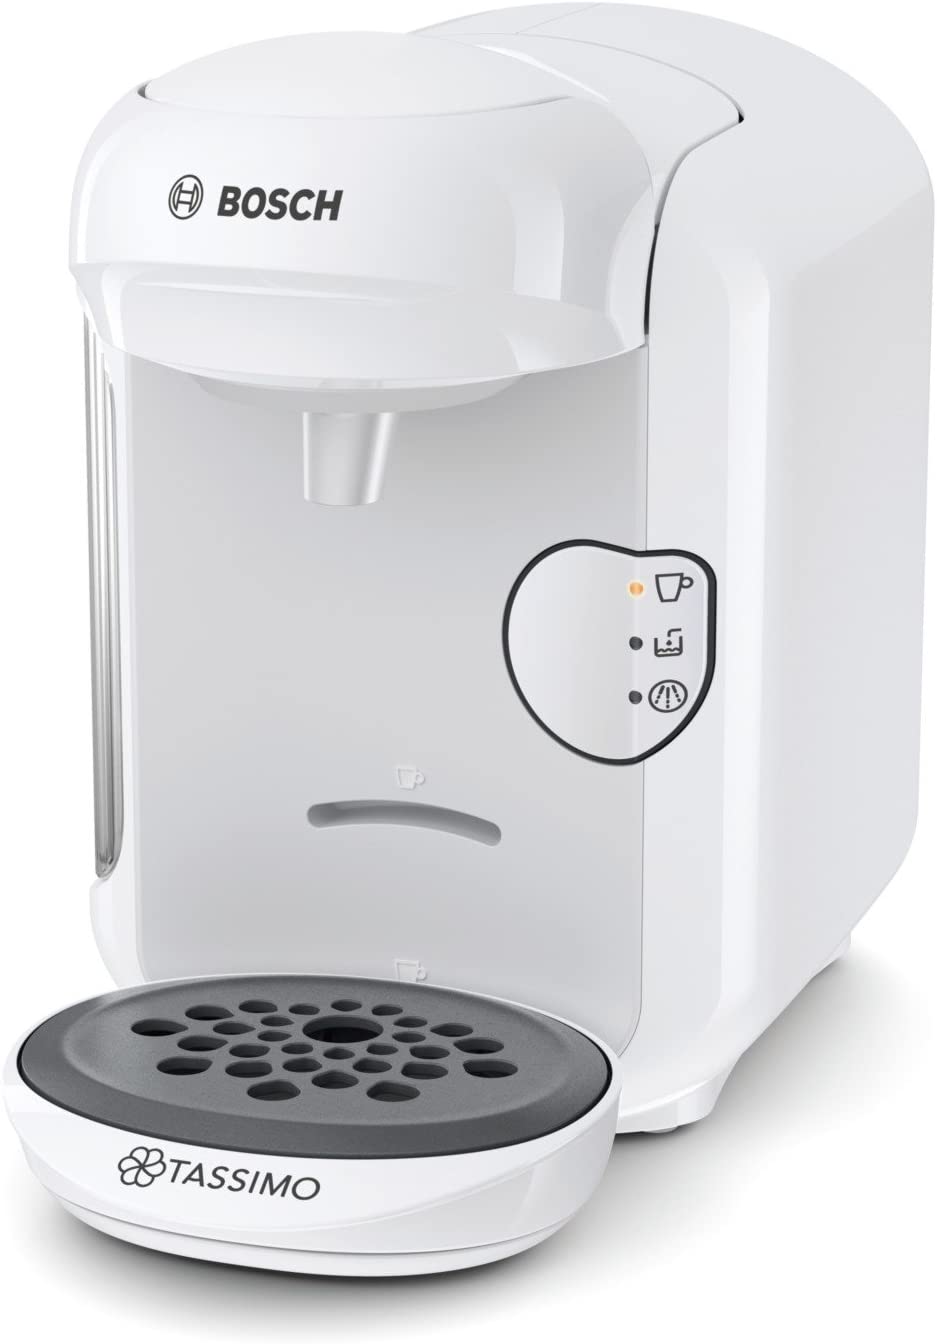 Bosch TAS1406 Tassimo Vivy2 Capsule Machine - for Over 70 Drinks - Fully Automatic - Suitable for All Cups - Compact Size, 1 colour concept, White